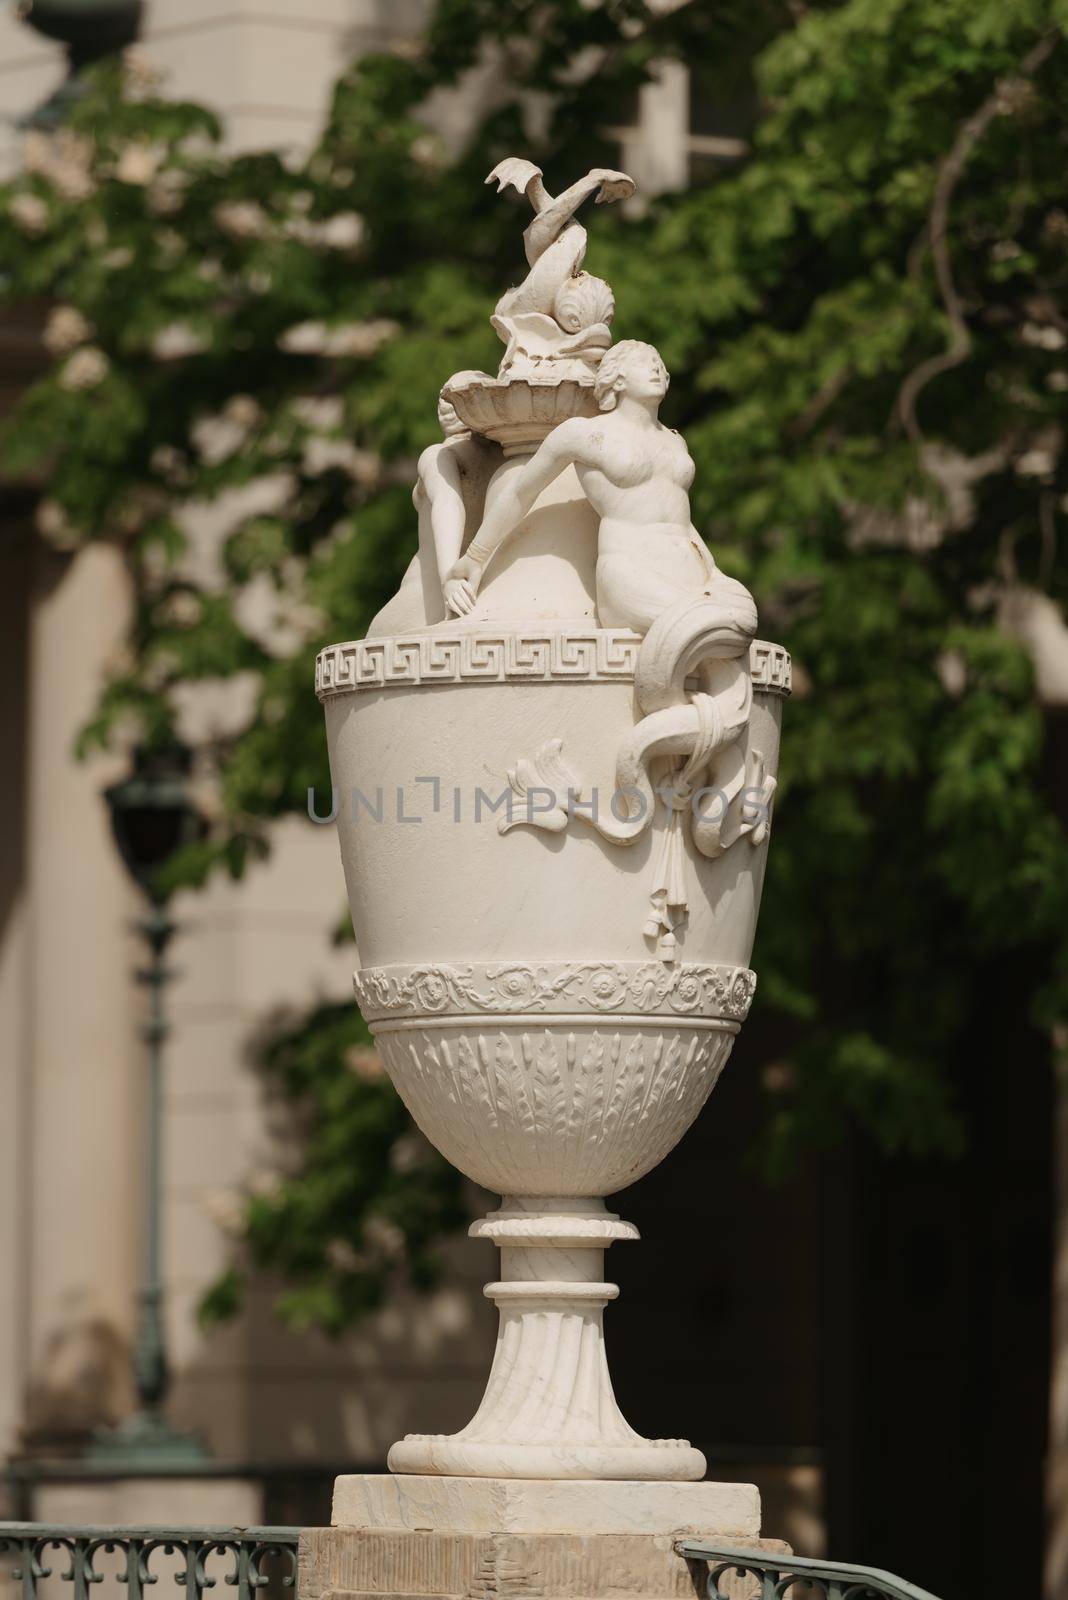 Warsaw, Poland - MAY 12, 2022: The old outdoor vase with sculptures in Royal Baths Park, Lazienki Park